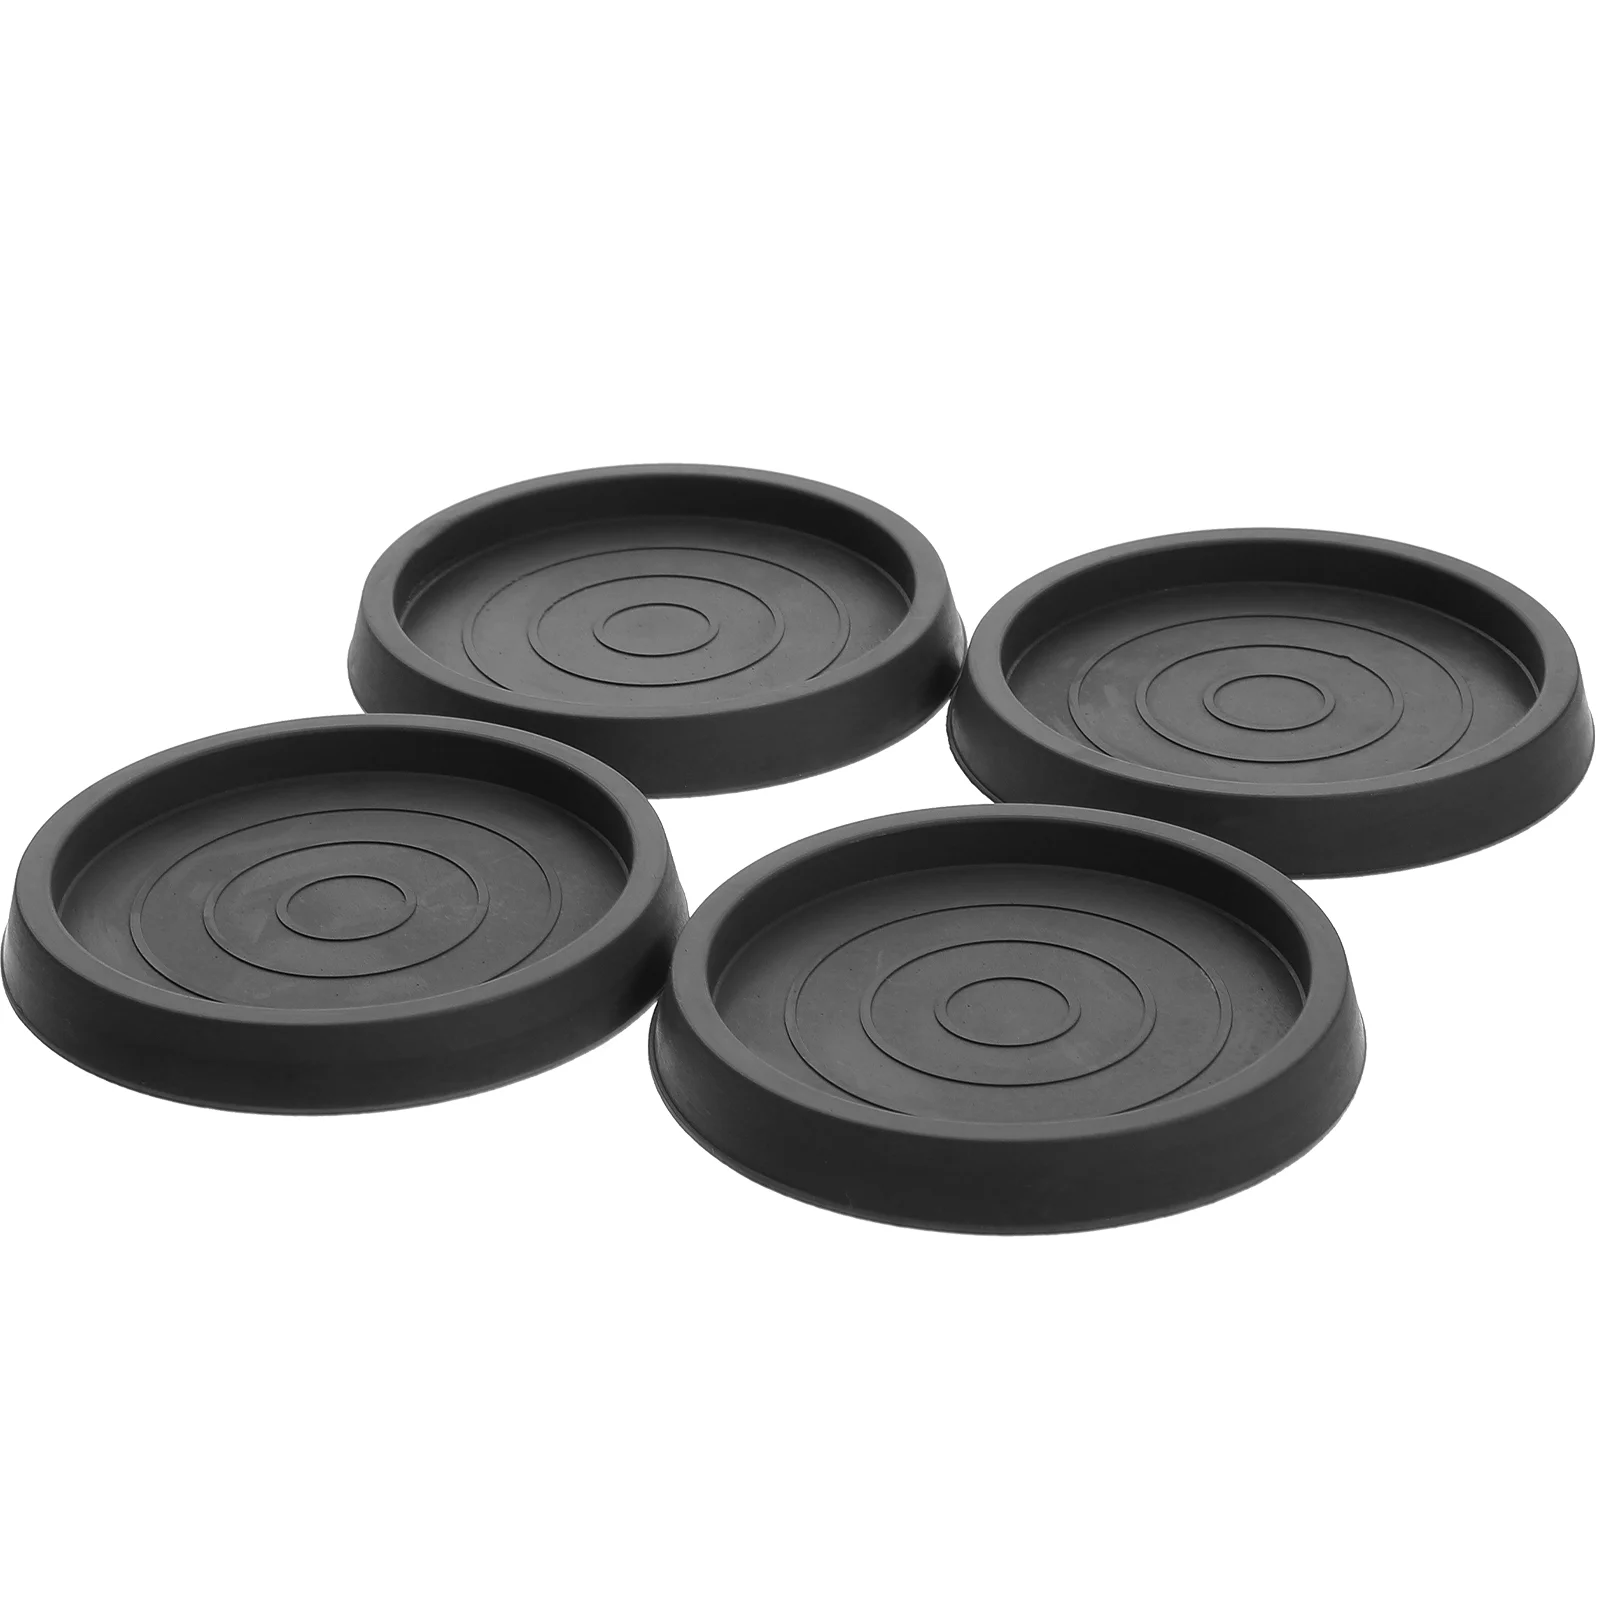 

4 Pcs Chair Pad Furniture Cup Non-slip Bed Stoppers Round Rug Rubber Couch Coaster Casters Supplies Prevent Sliding Cups